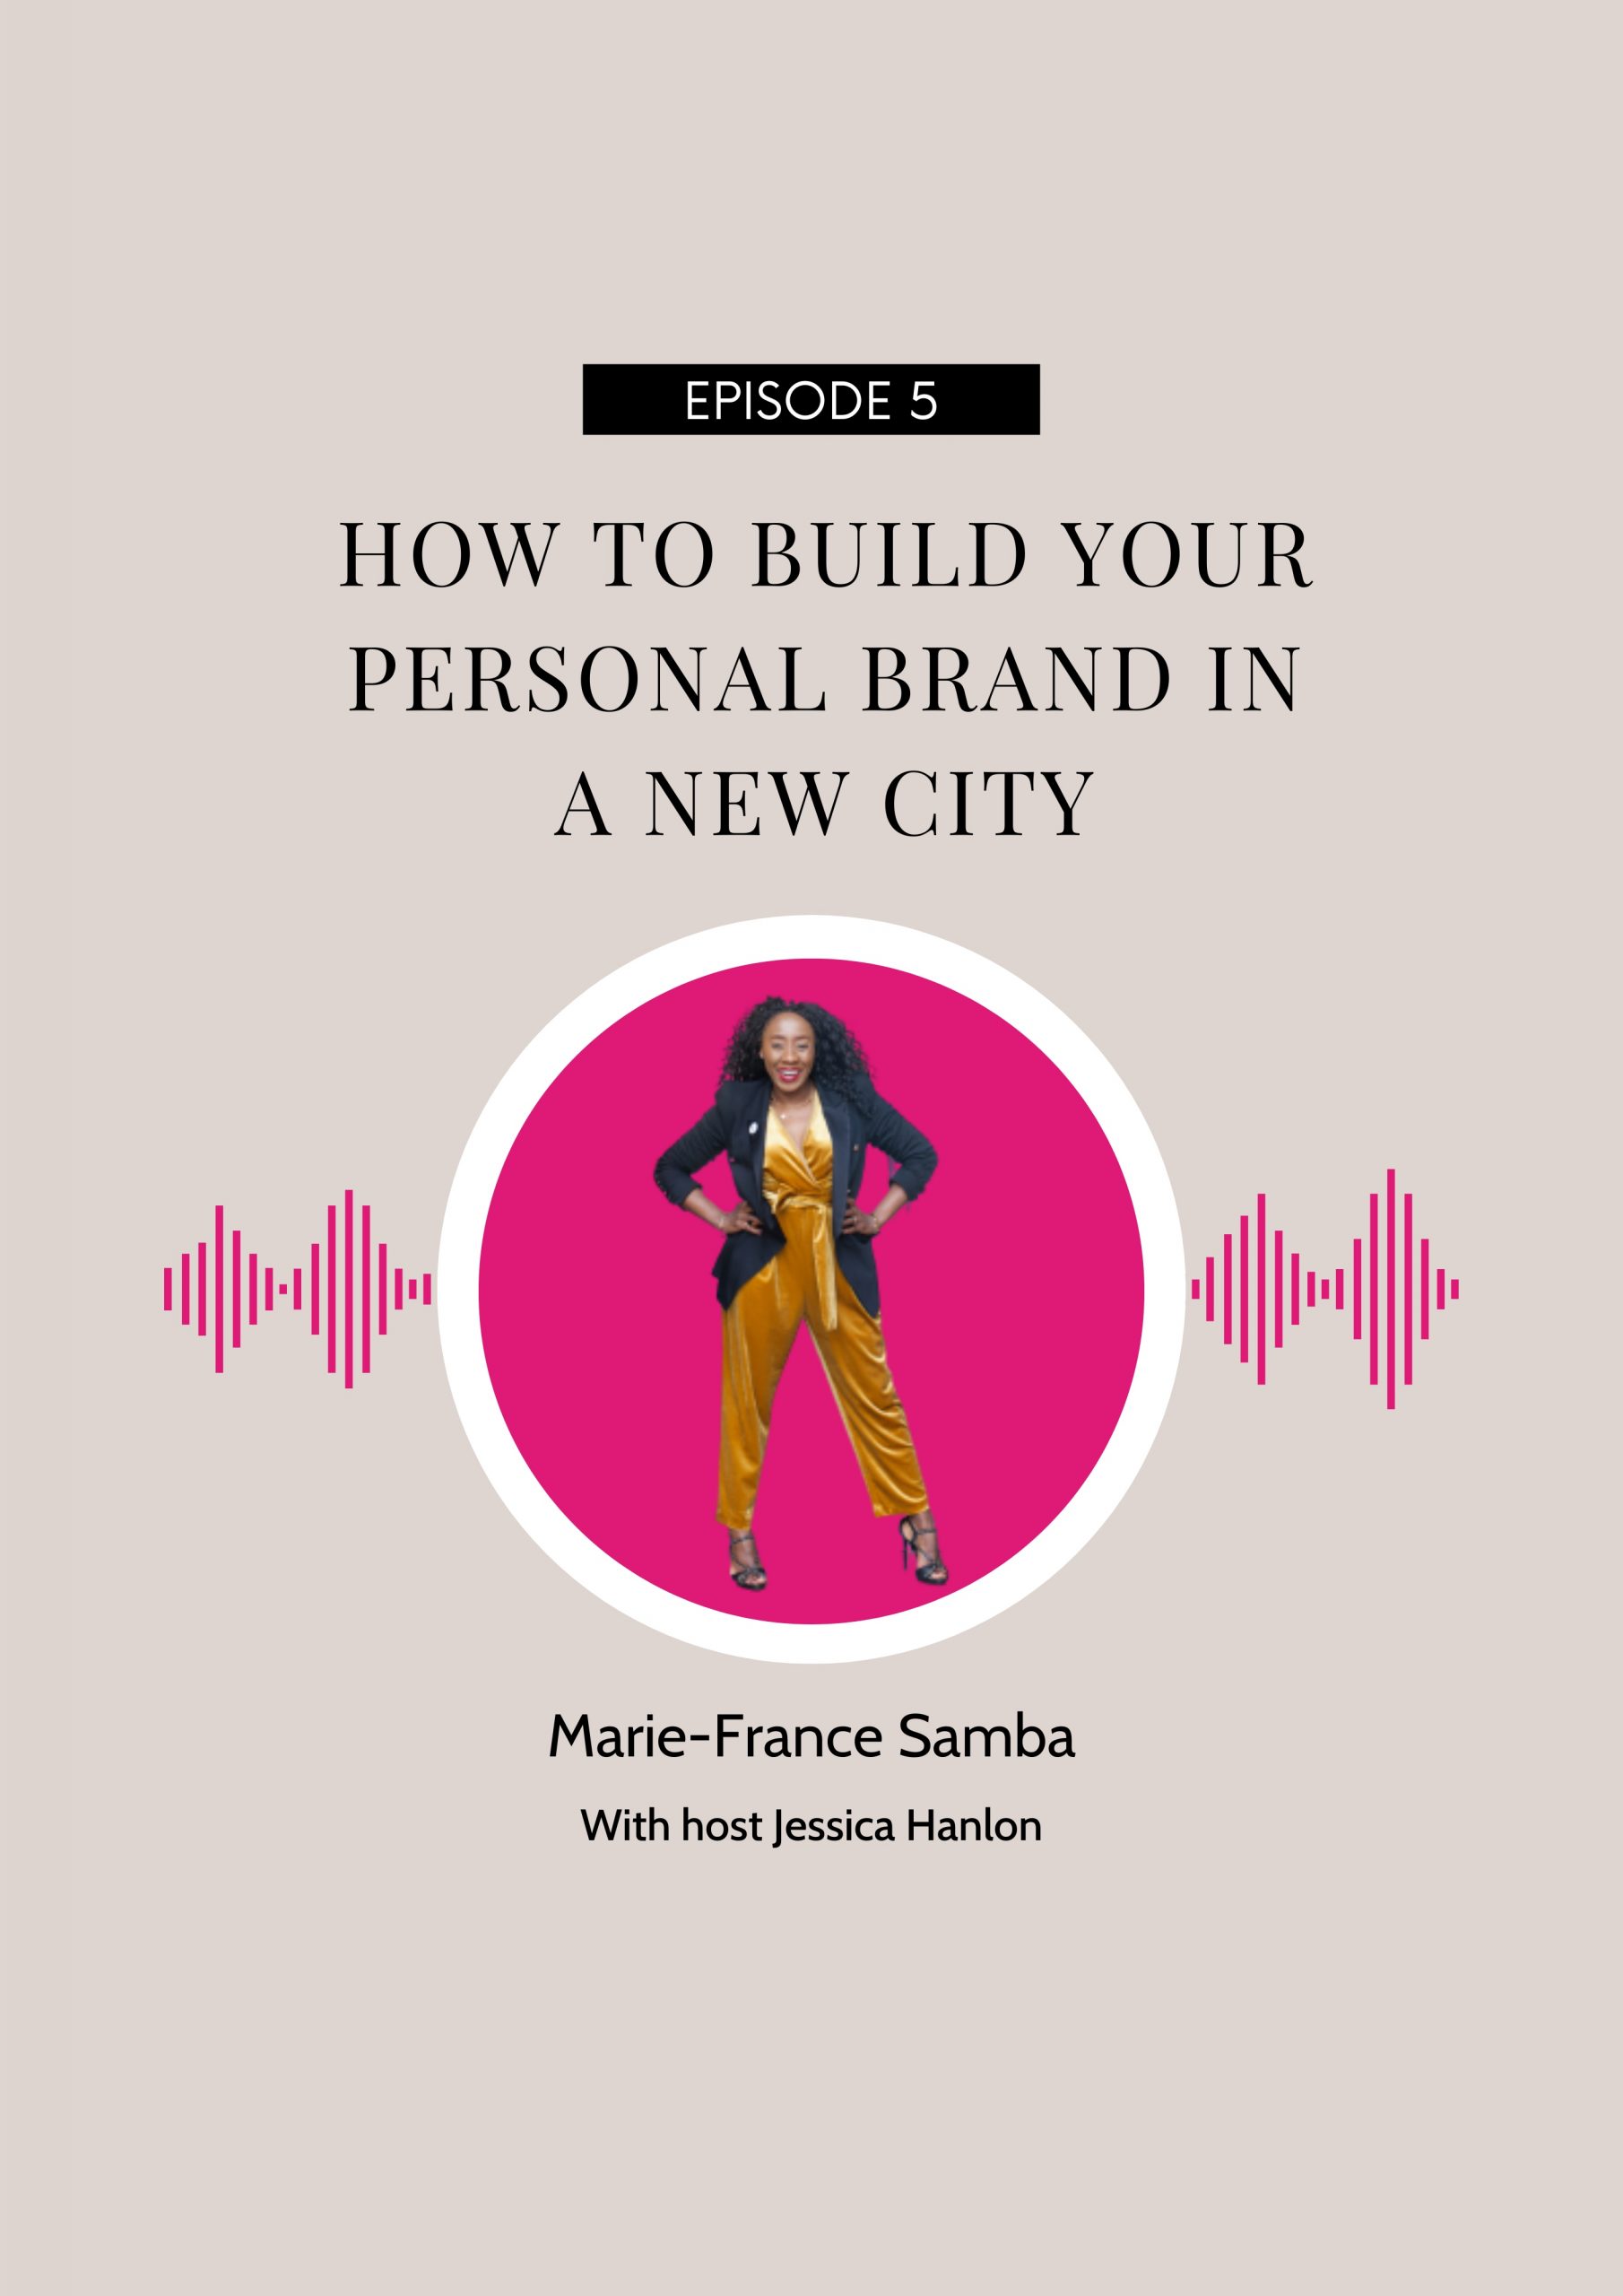 How to build a personal brand in a new city